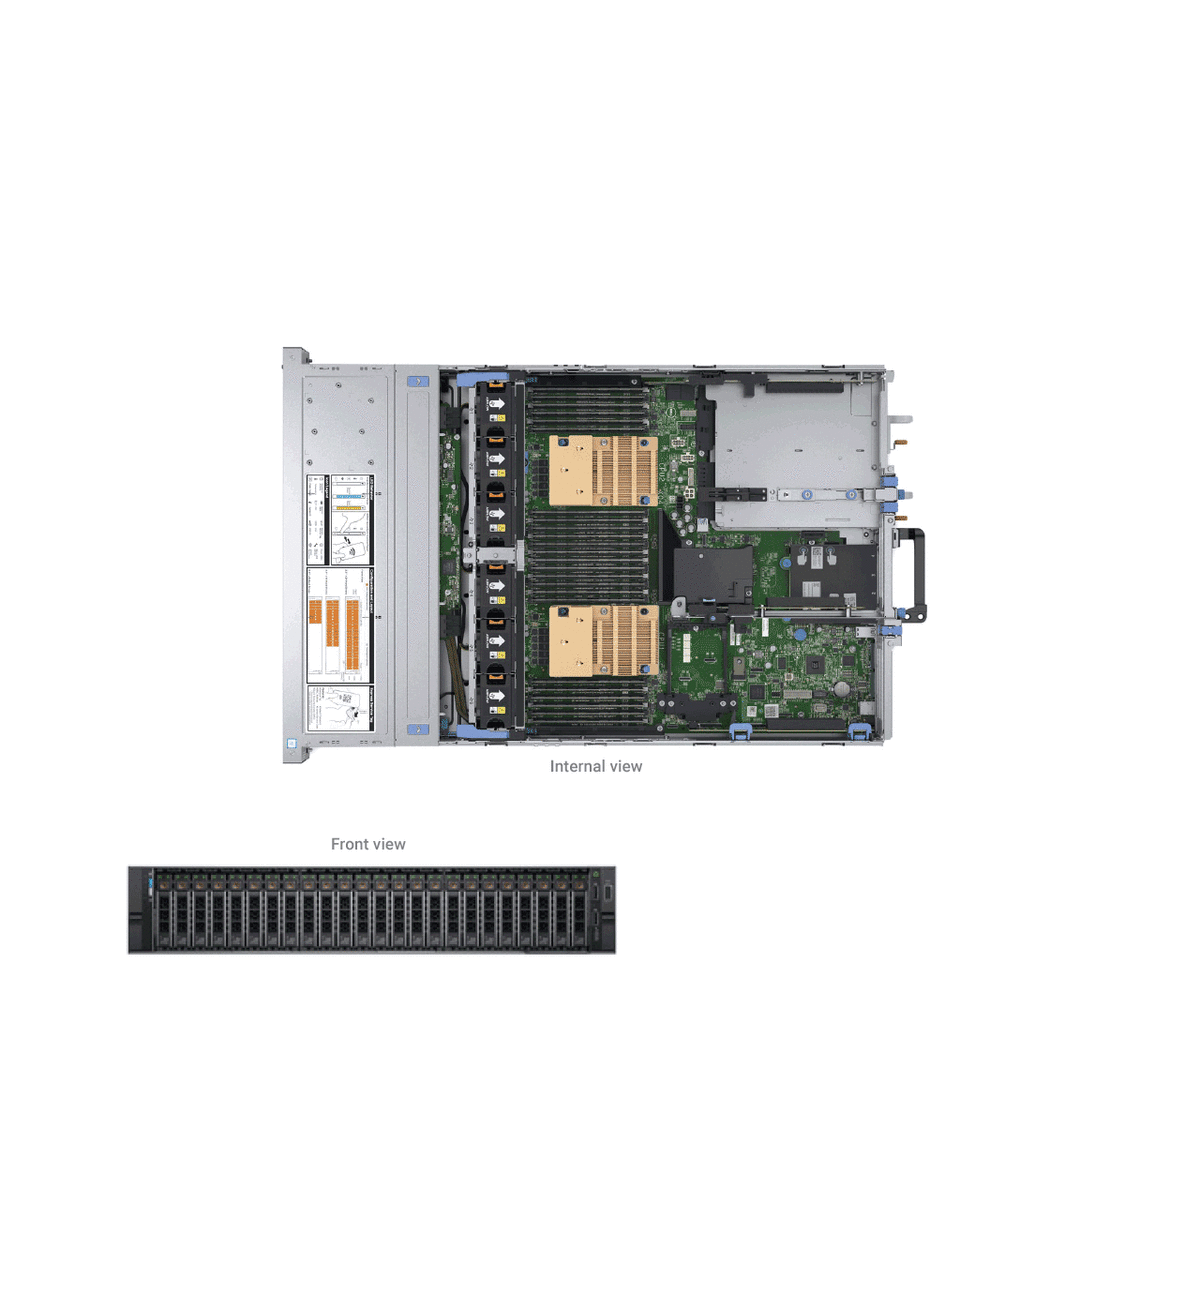 Dell Dual Port Broadcom 57416 10Gb Base-T, PCIe Adapter Full Height/Low profile